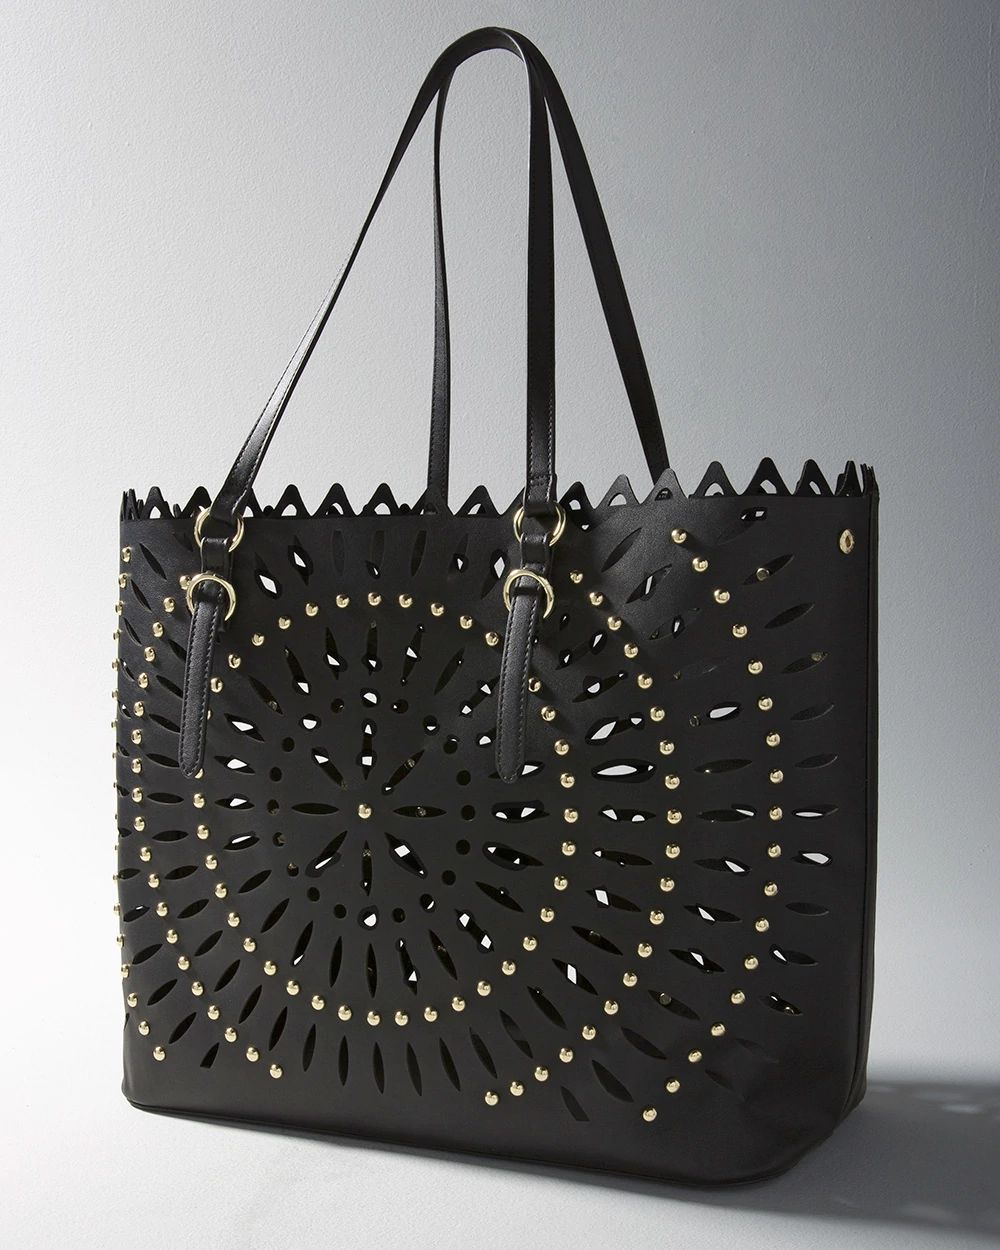 Vegan Leather Laser-Cut Tote click to view larger image.